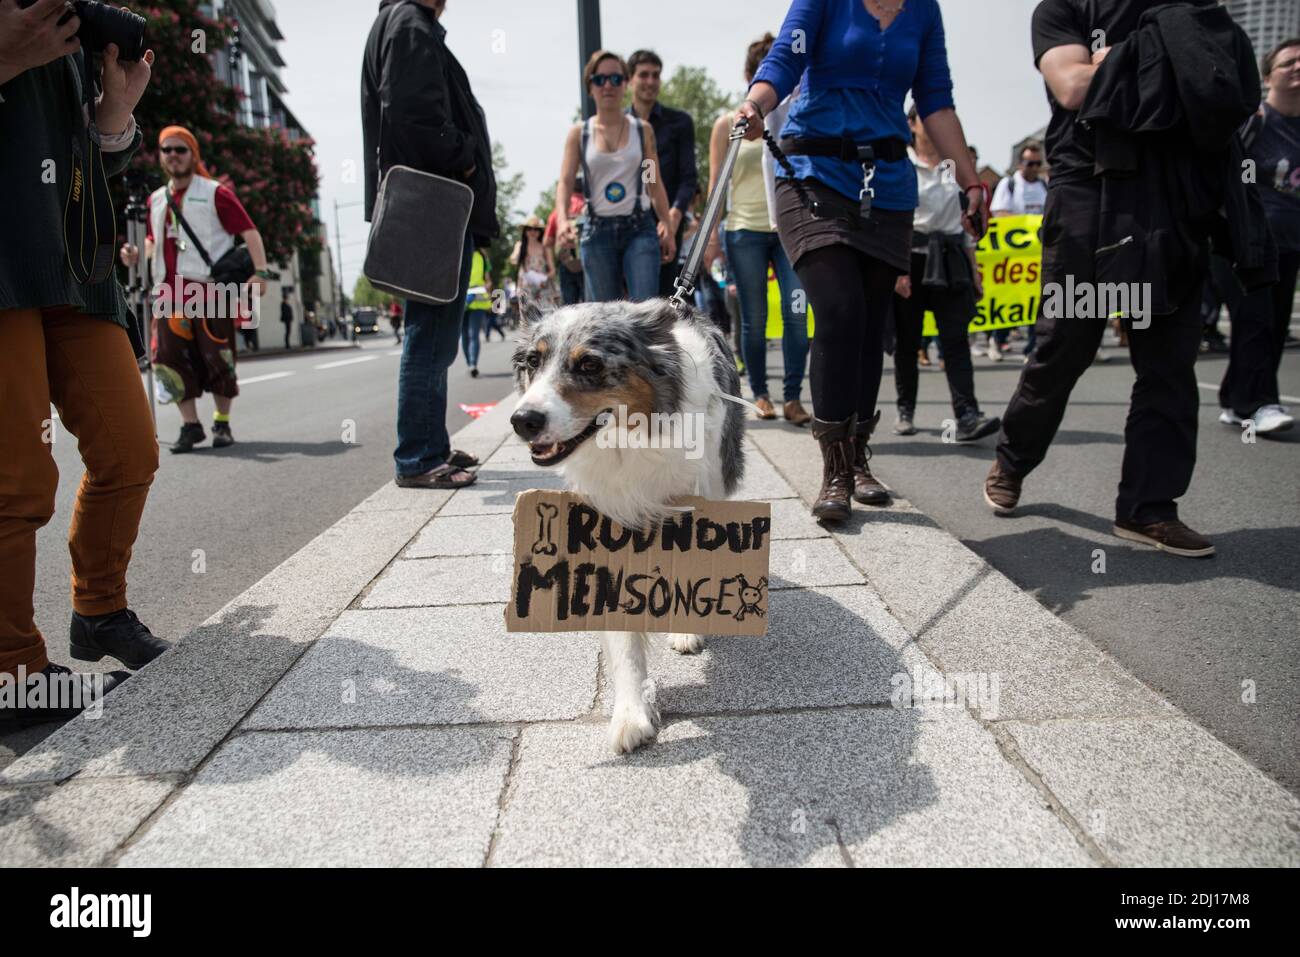 People demonstrate against American multinational agrochemical and agricultural biotechnology corporation Monsanto in an effort to promote global awareness over the issue of genetically modified organisms (GMOs) and cancer-linked herbicides in the food supply, innParis, France on May 21, 2016. Photo by Kevin Niglaut/ABACAPRESS.COM Stock Photo